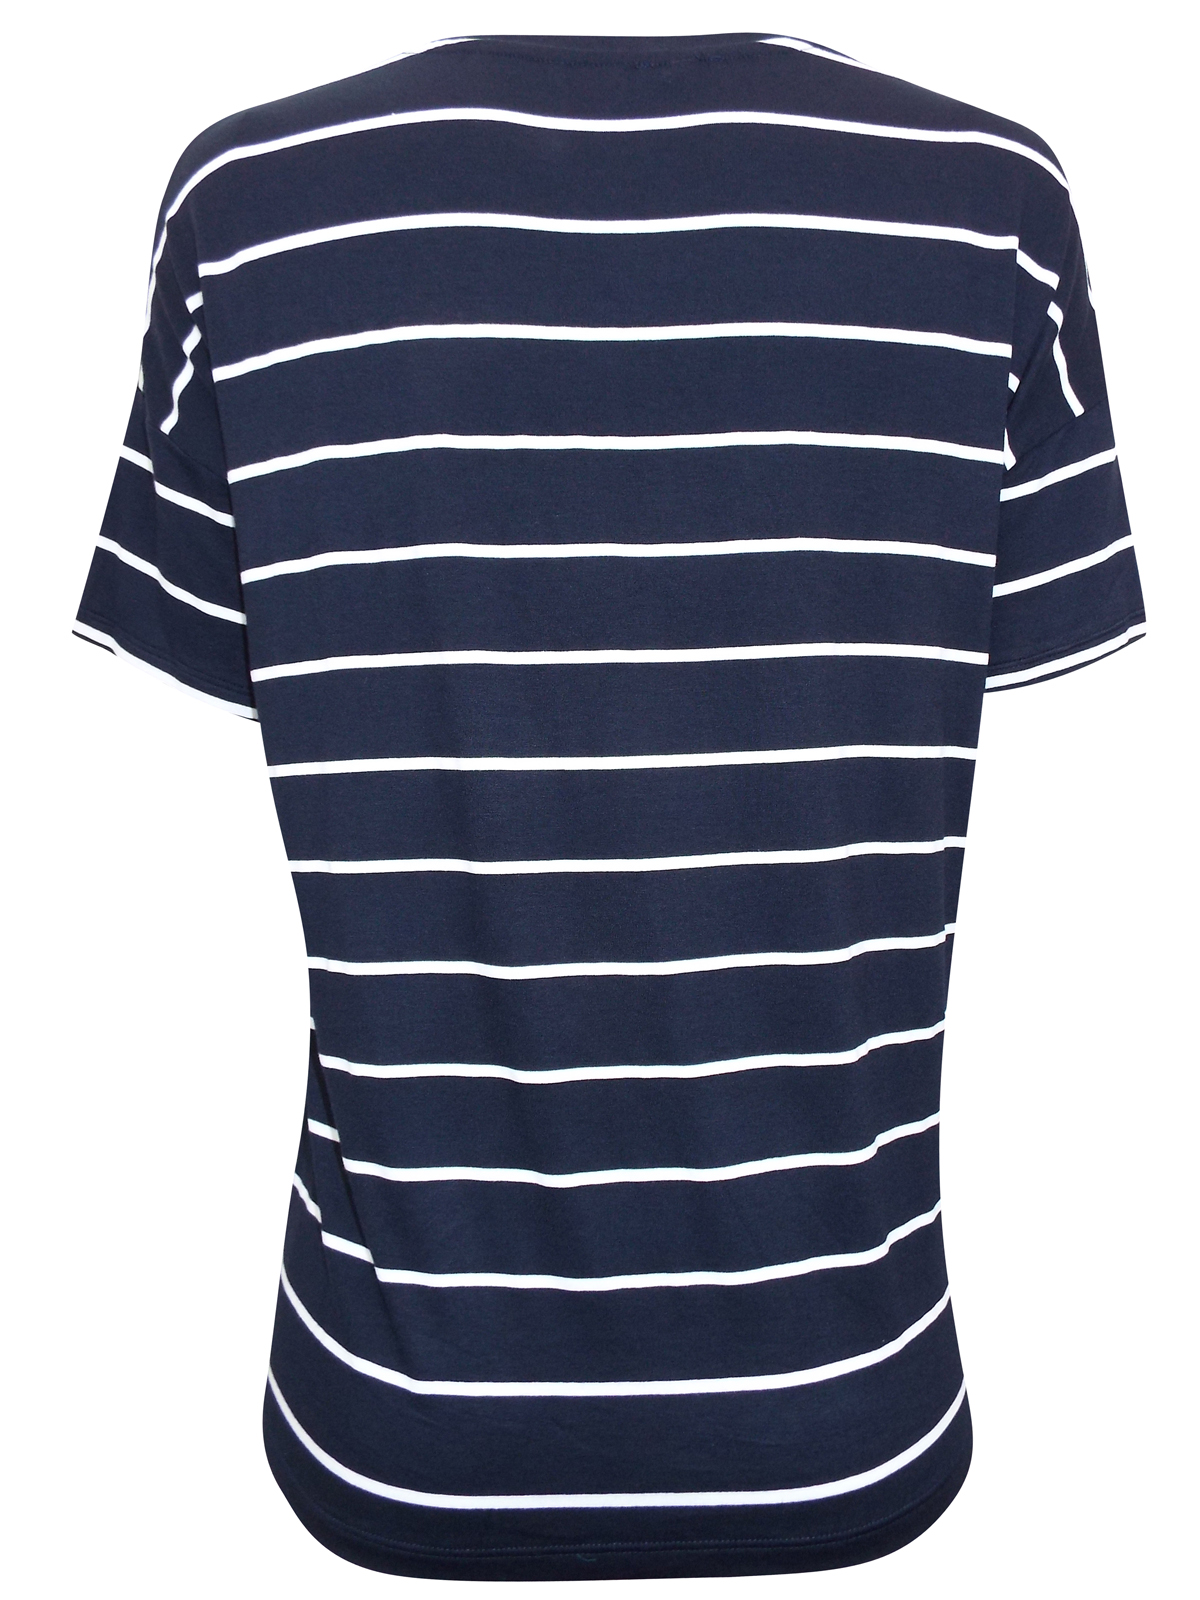 Marks and Spencer - - M&5 NAVY Nautical Stripe Short Sleeve Jersey Top ...